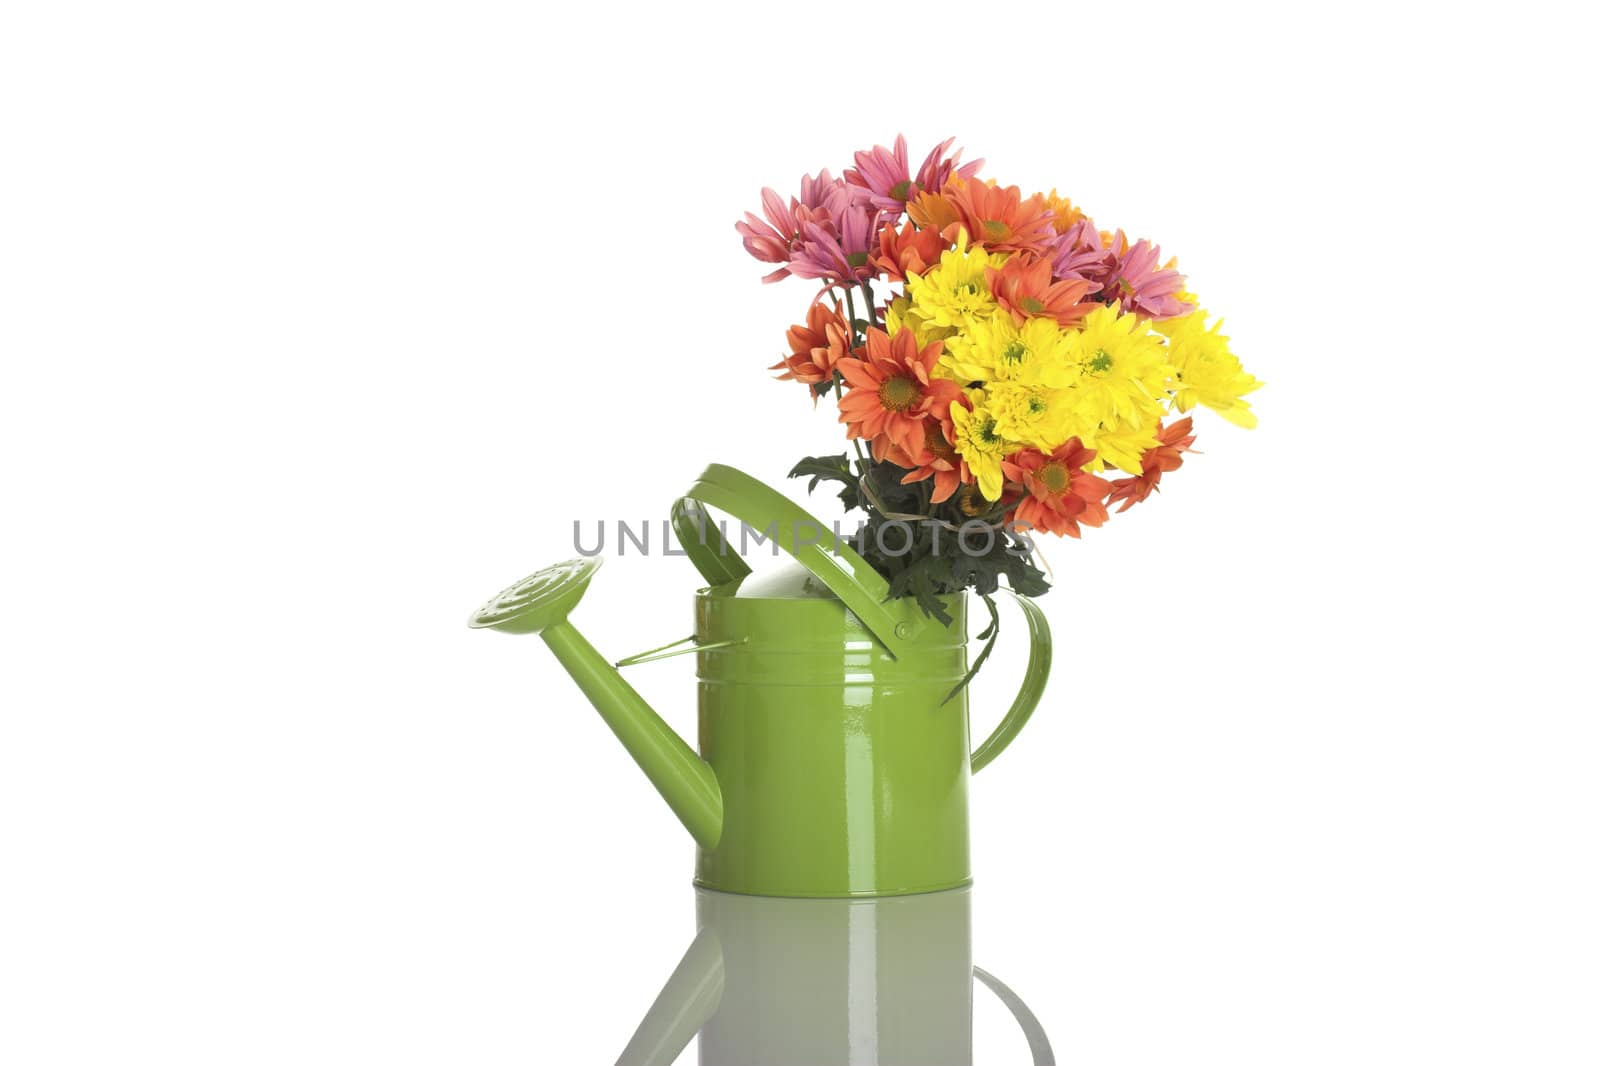 Green watering can with flowers isolated on white